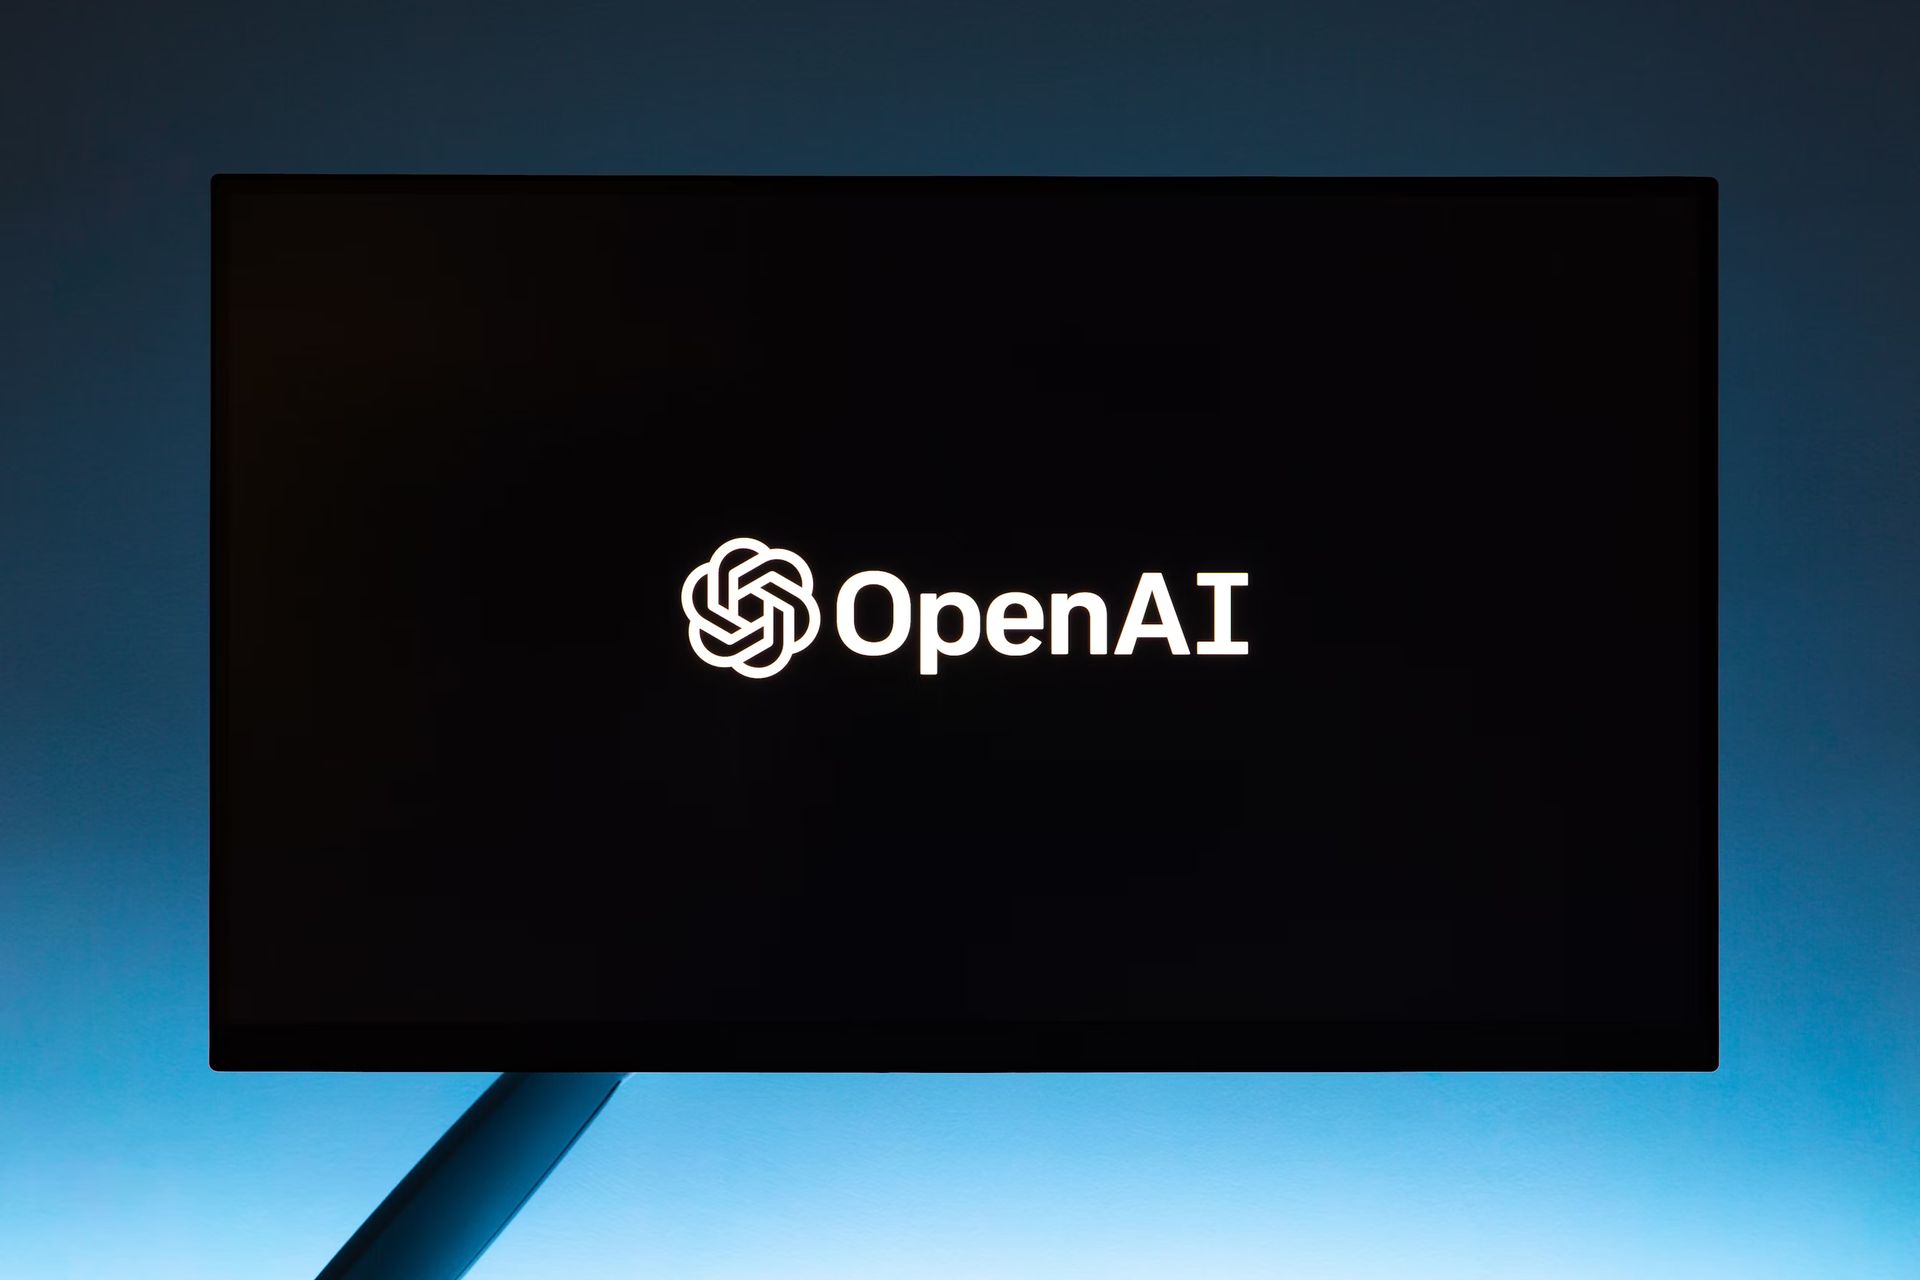 OpenAI doesn't want people to use DALL-E for deepfakes